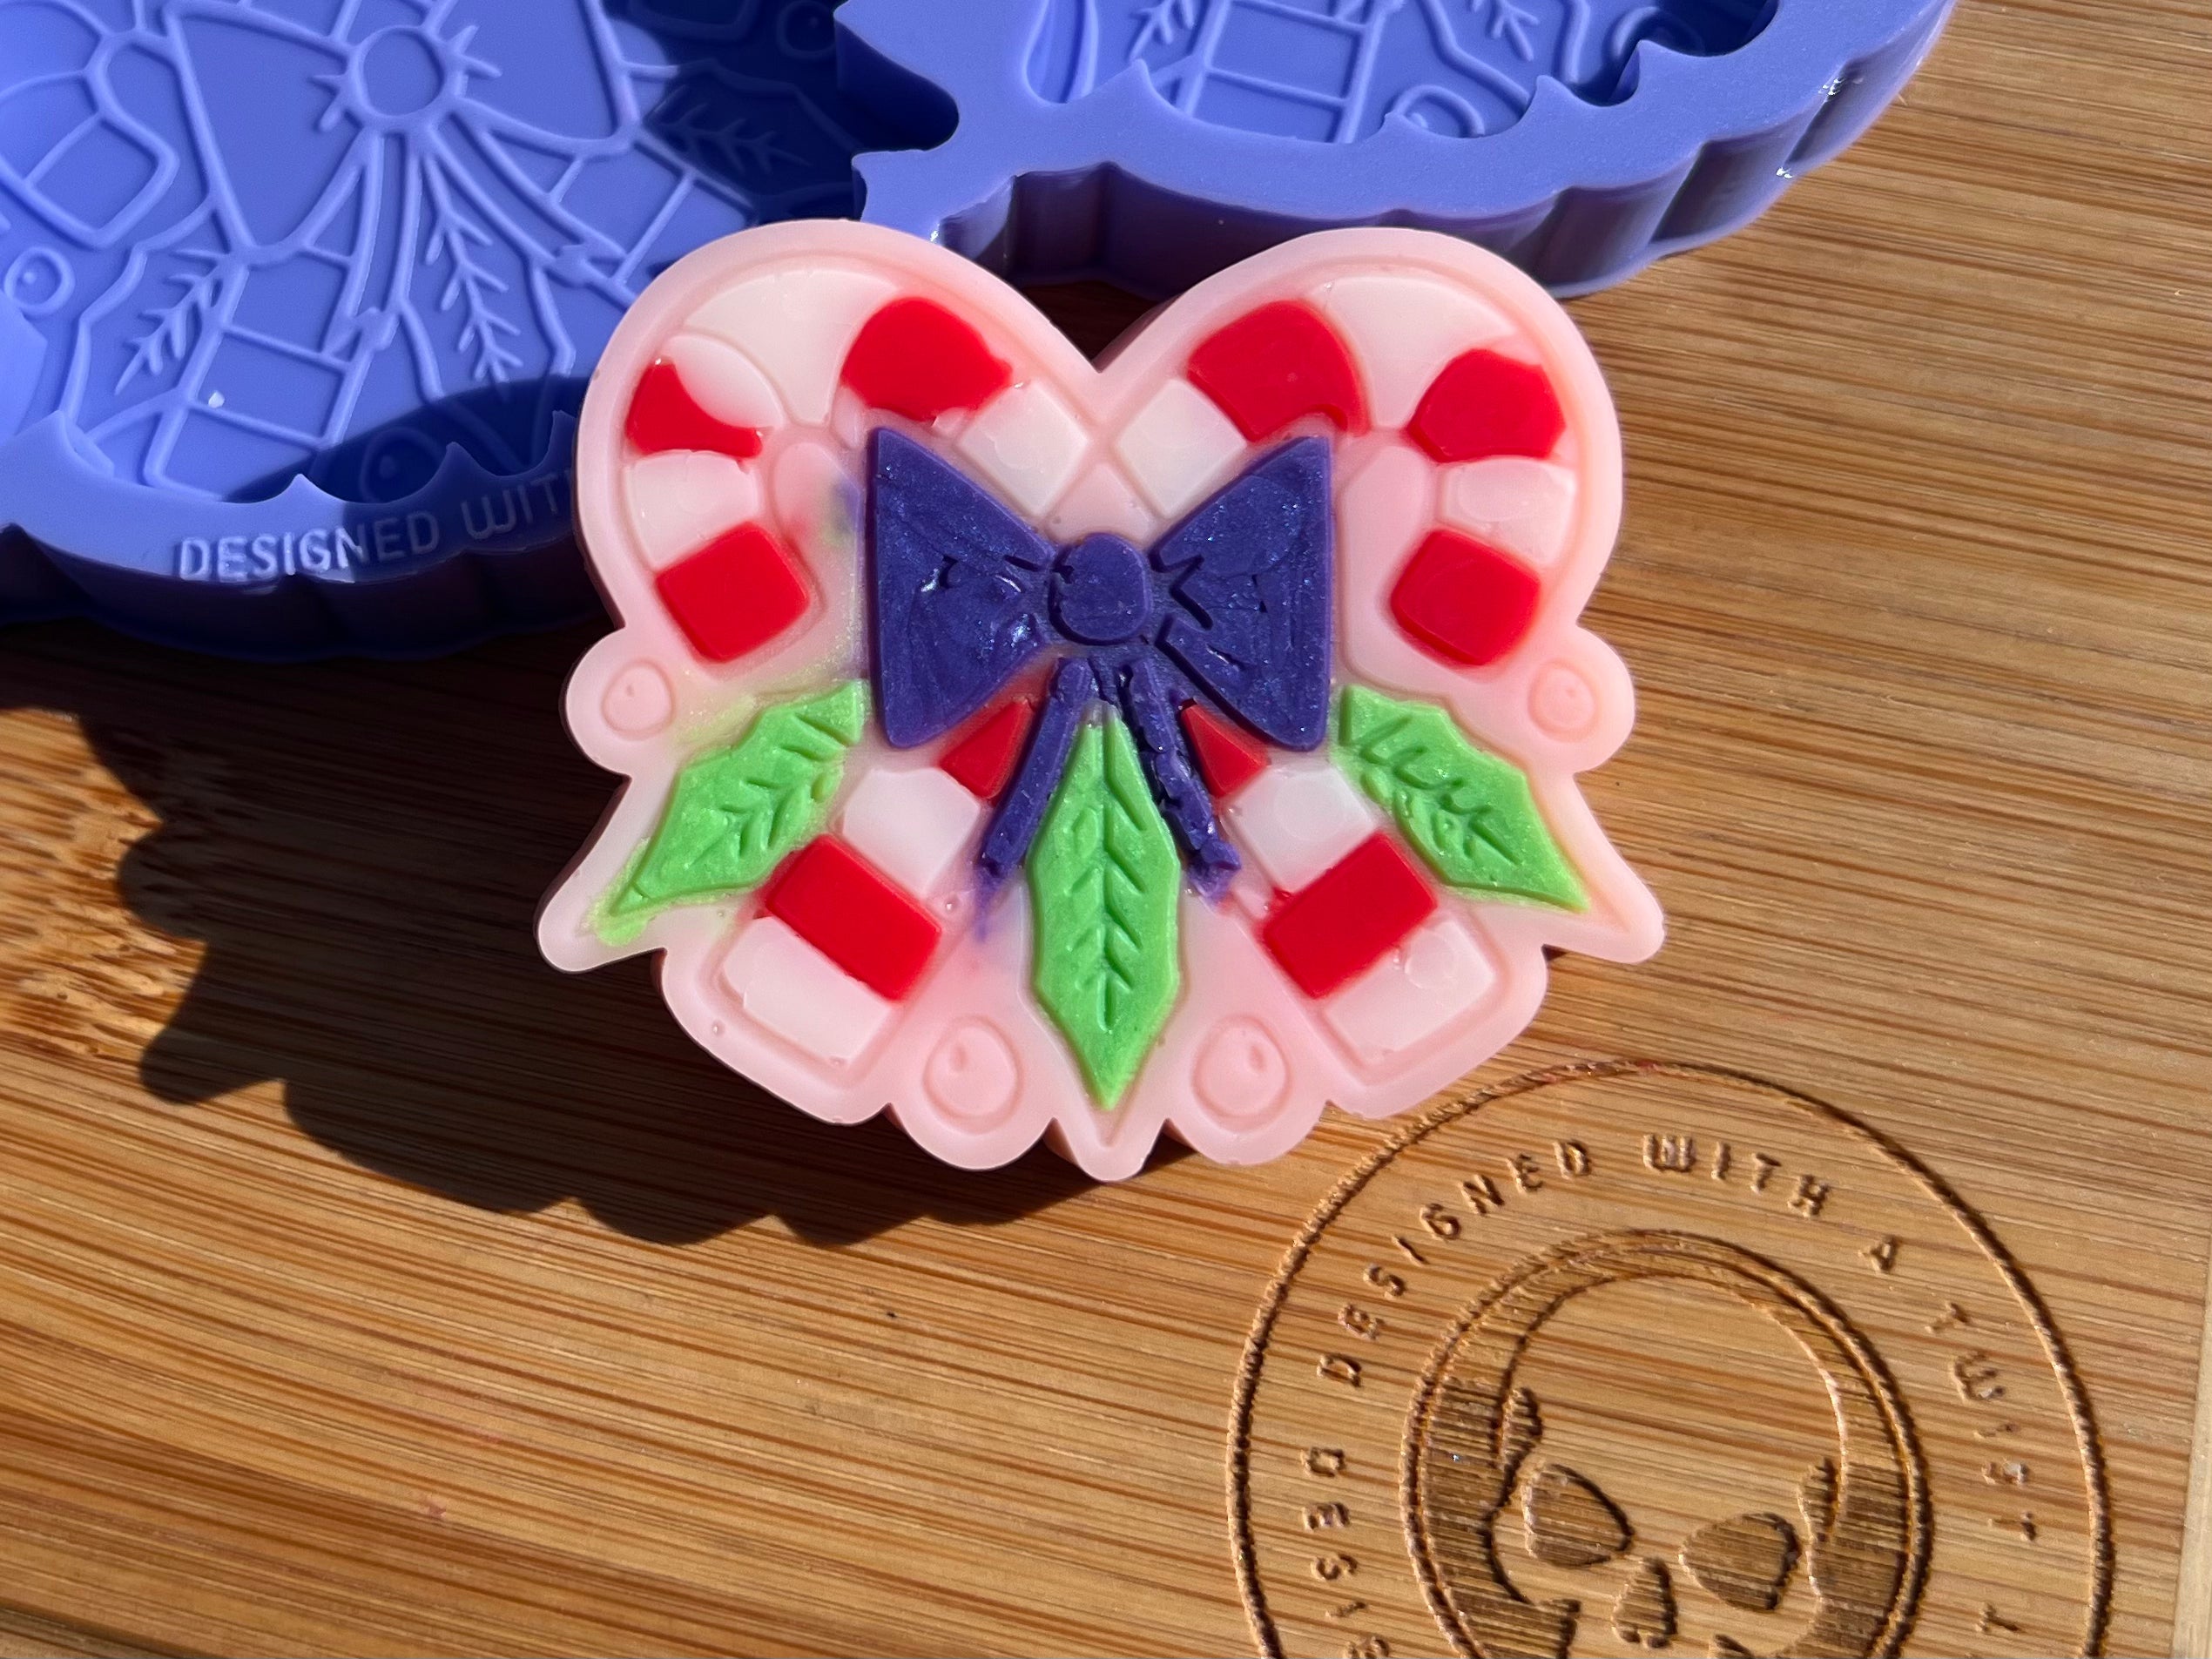 Candy Cane Wreath Wax Melt Silicone Mold - Designed with a Twist - Top quality silicone molds made in the UK.